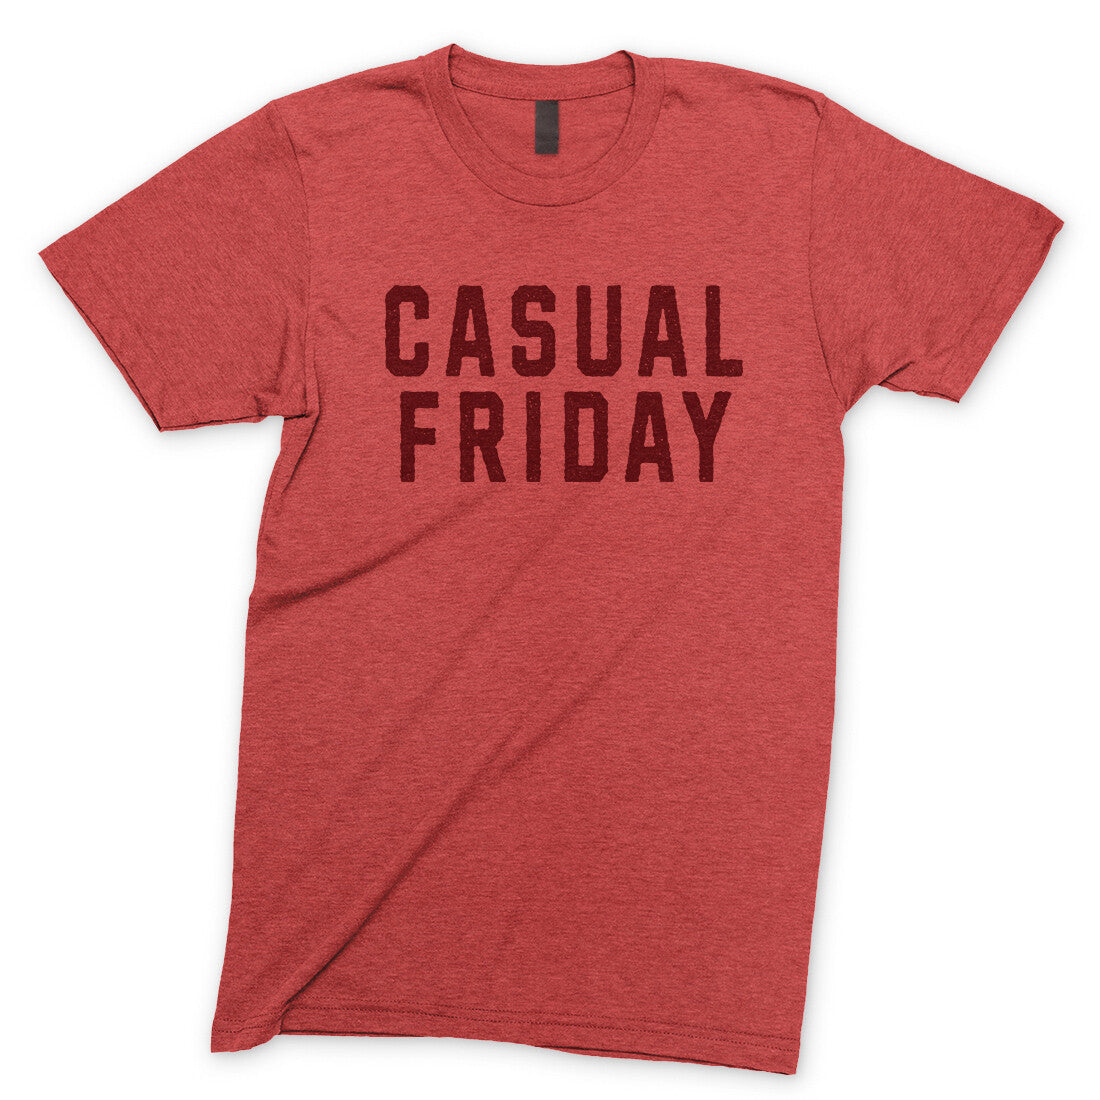 Casual Friday in Heather Red Color